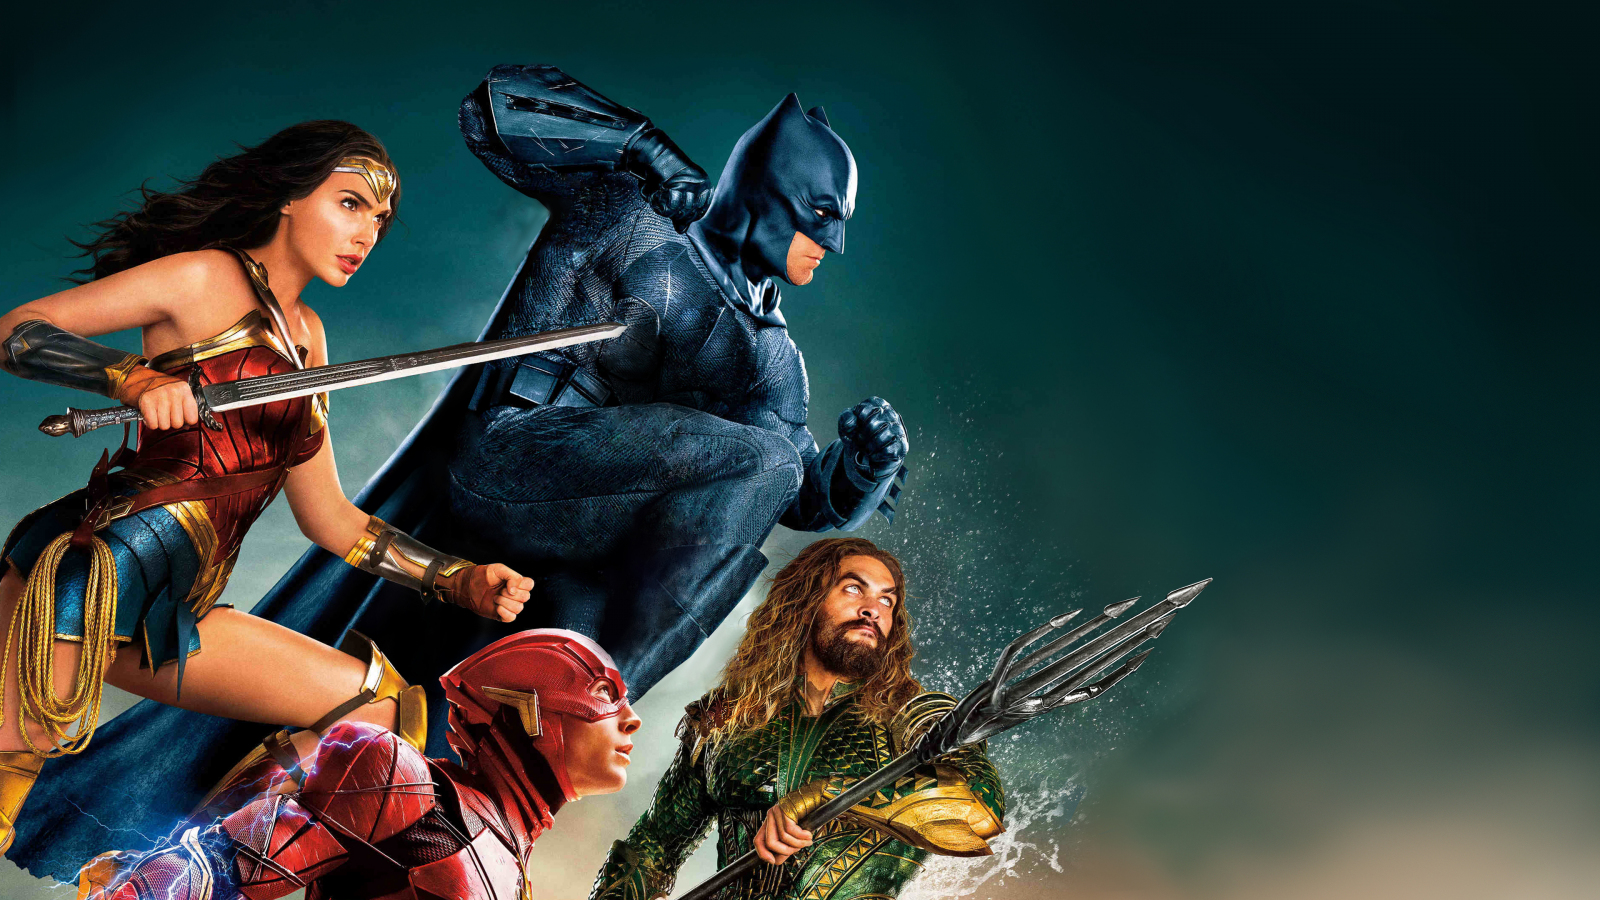 Download 1600x900 wallpaper justice league, movie, superheroes, widescreen 16: widescreen, 1600x900 HD image, background, 831